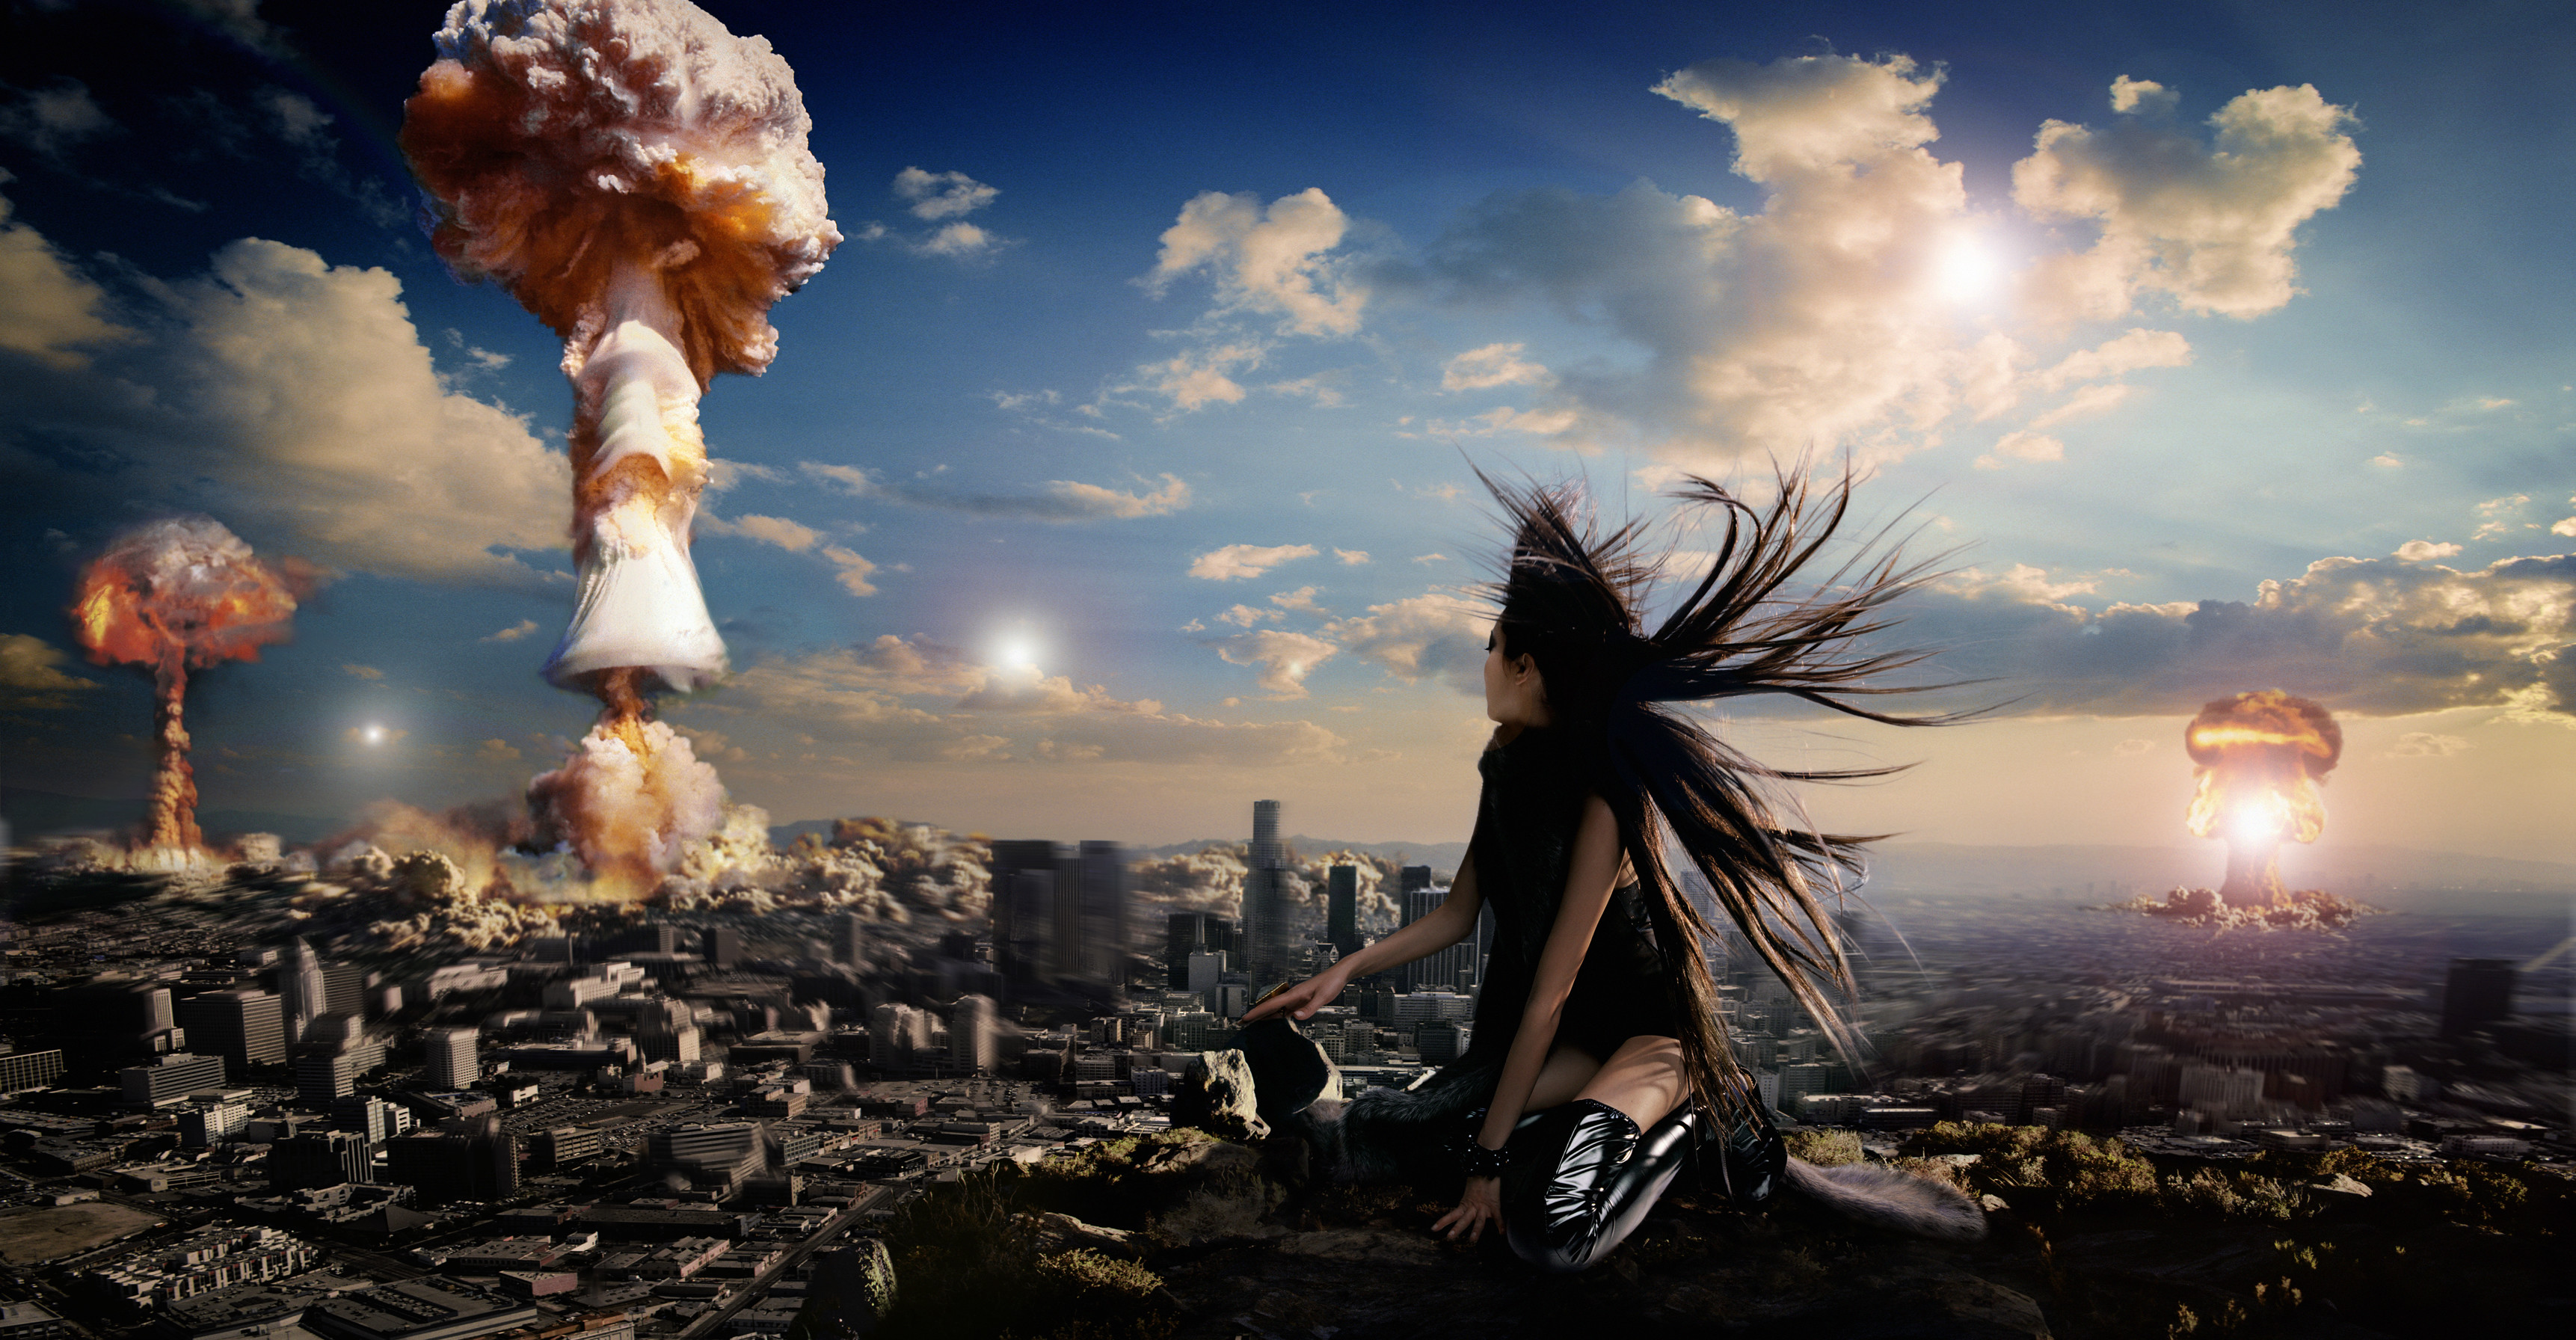 3445x1792 nuclear hd wallpapers. seeing the bomb. nuclear wallpaper group